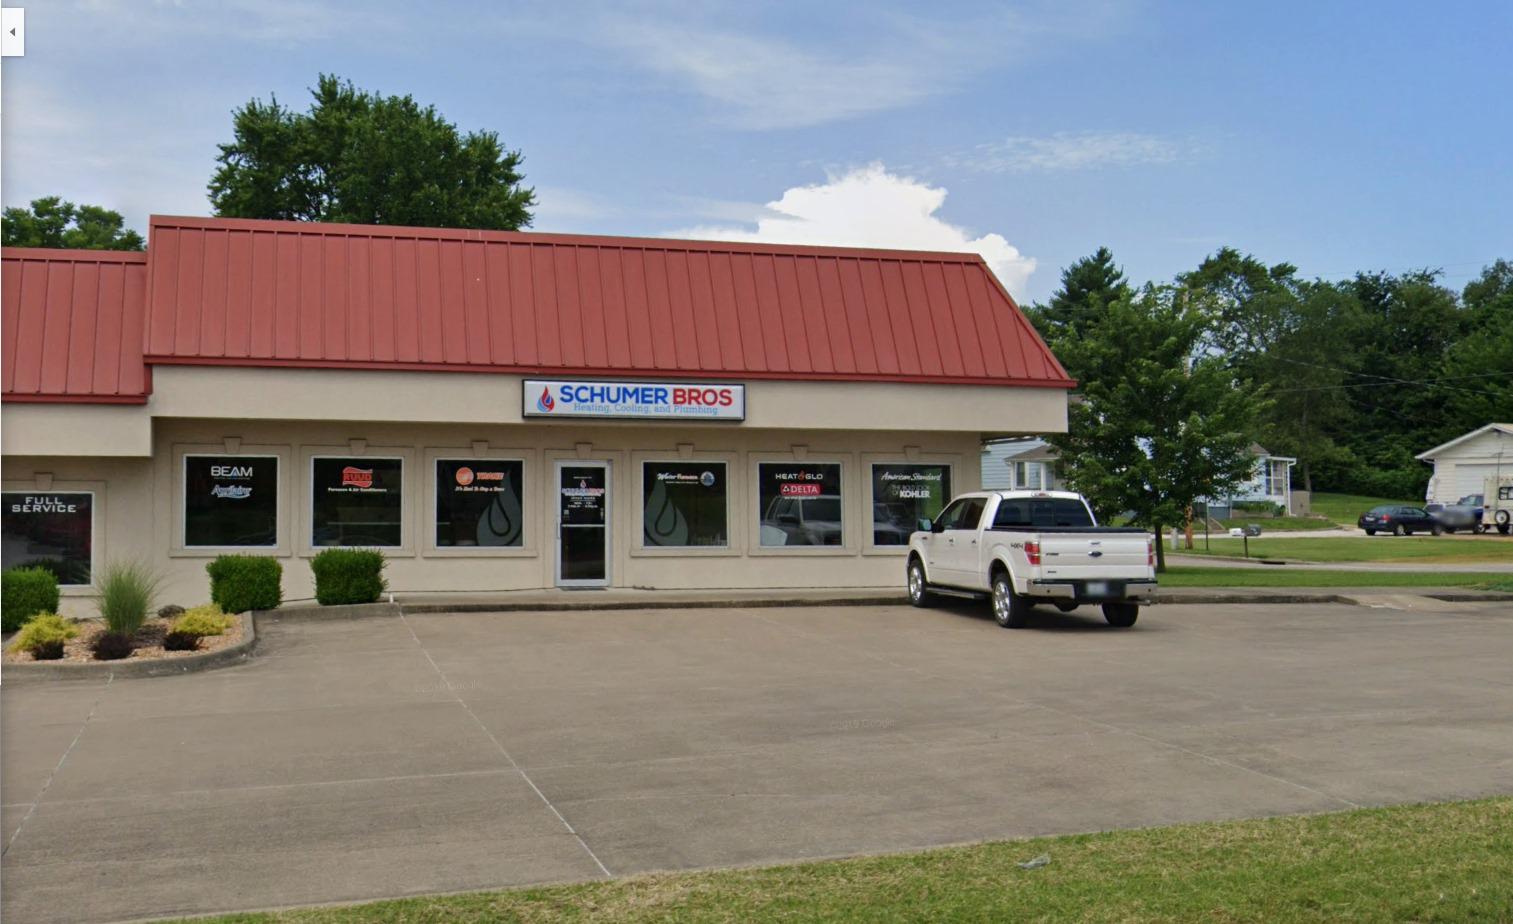 We are located at 821 N. Kings Highway, Perryville, MO. Stop by and pay us a visit!